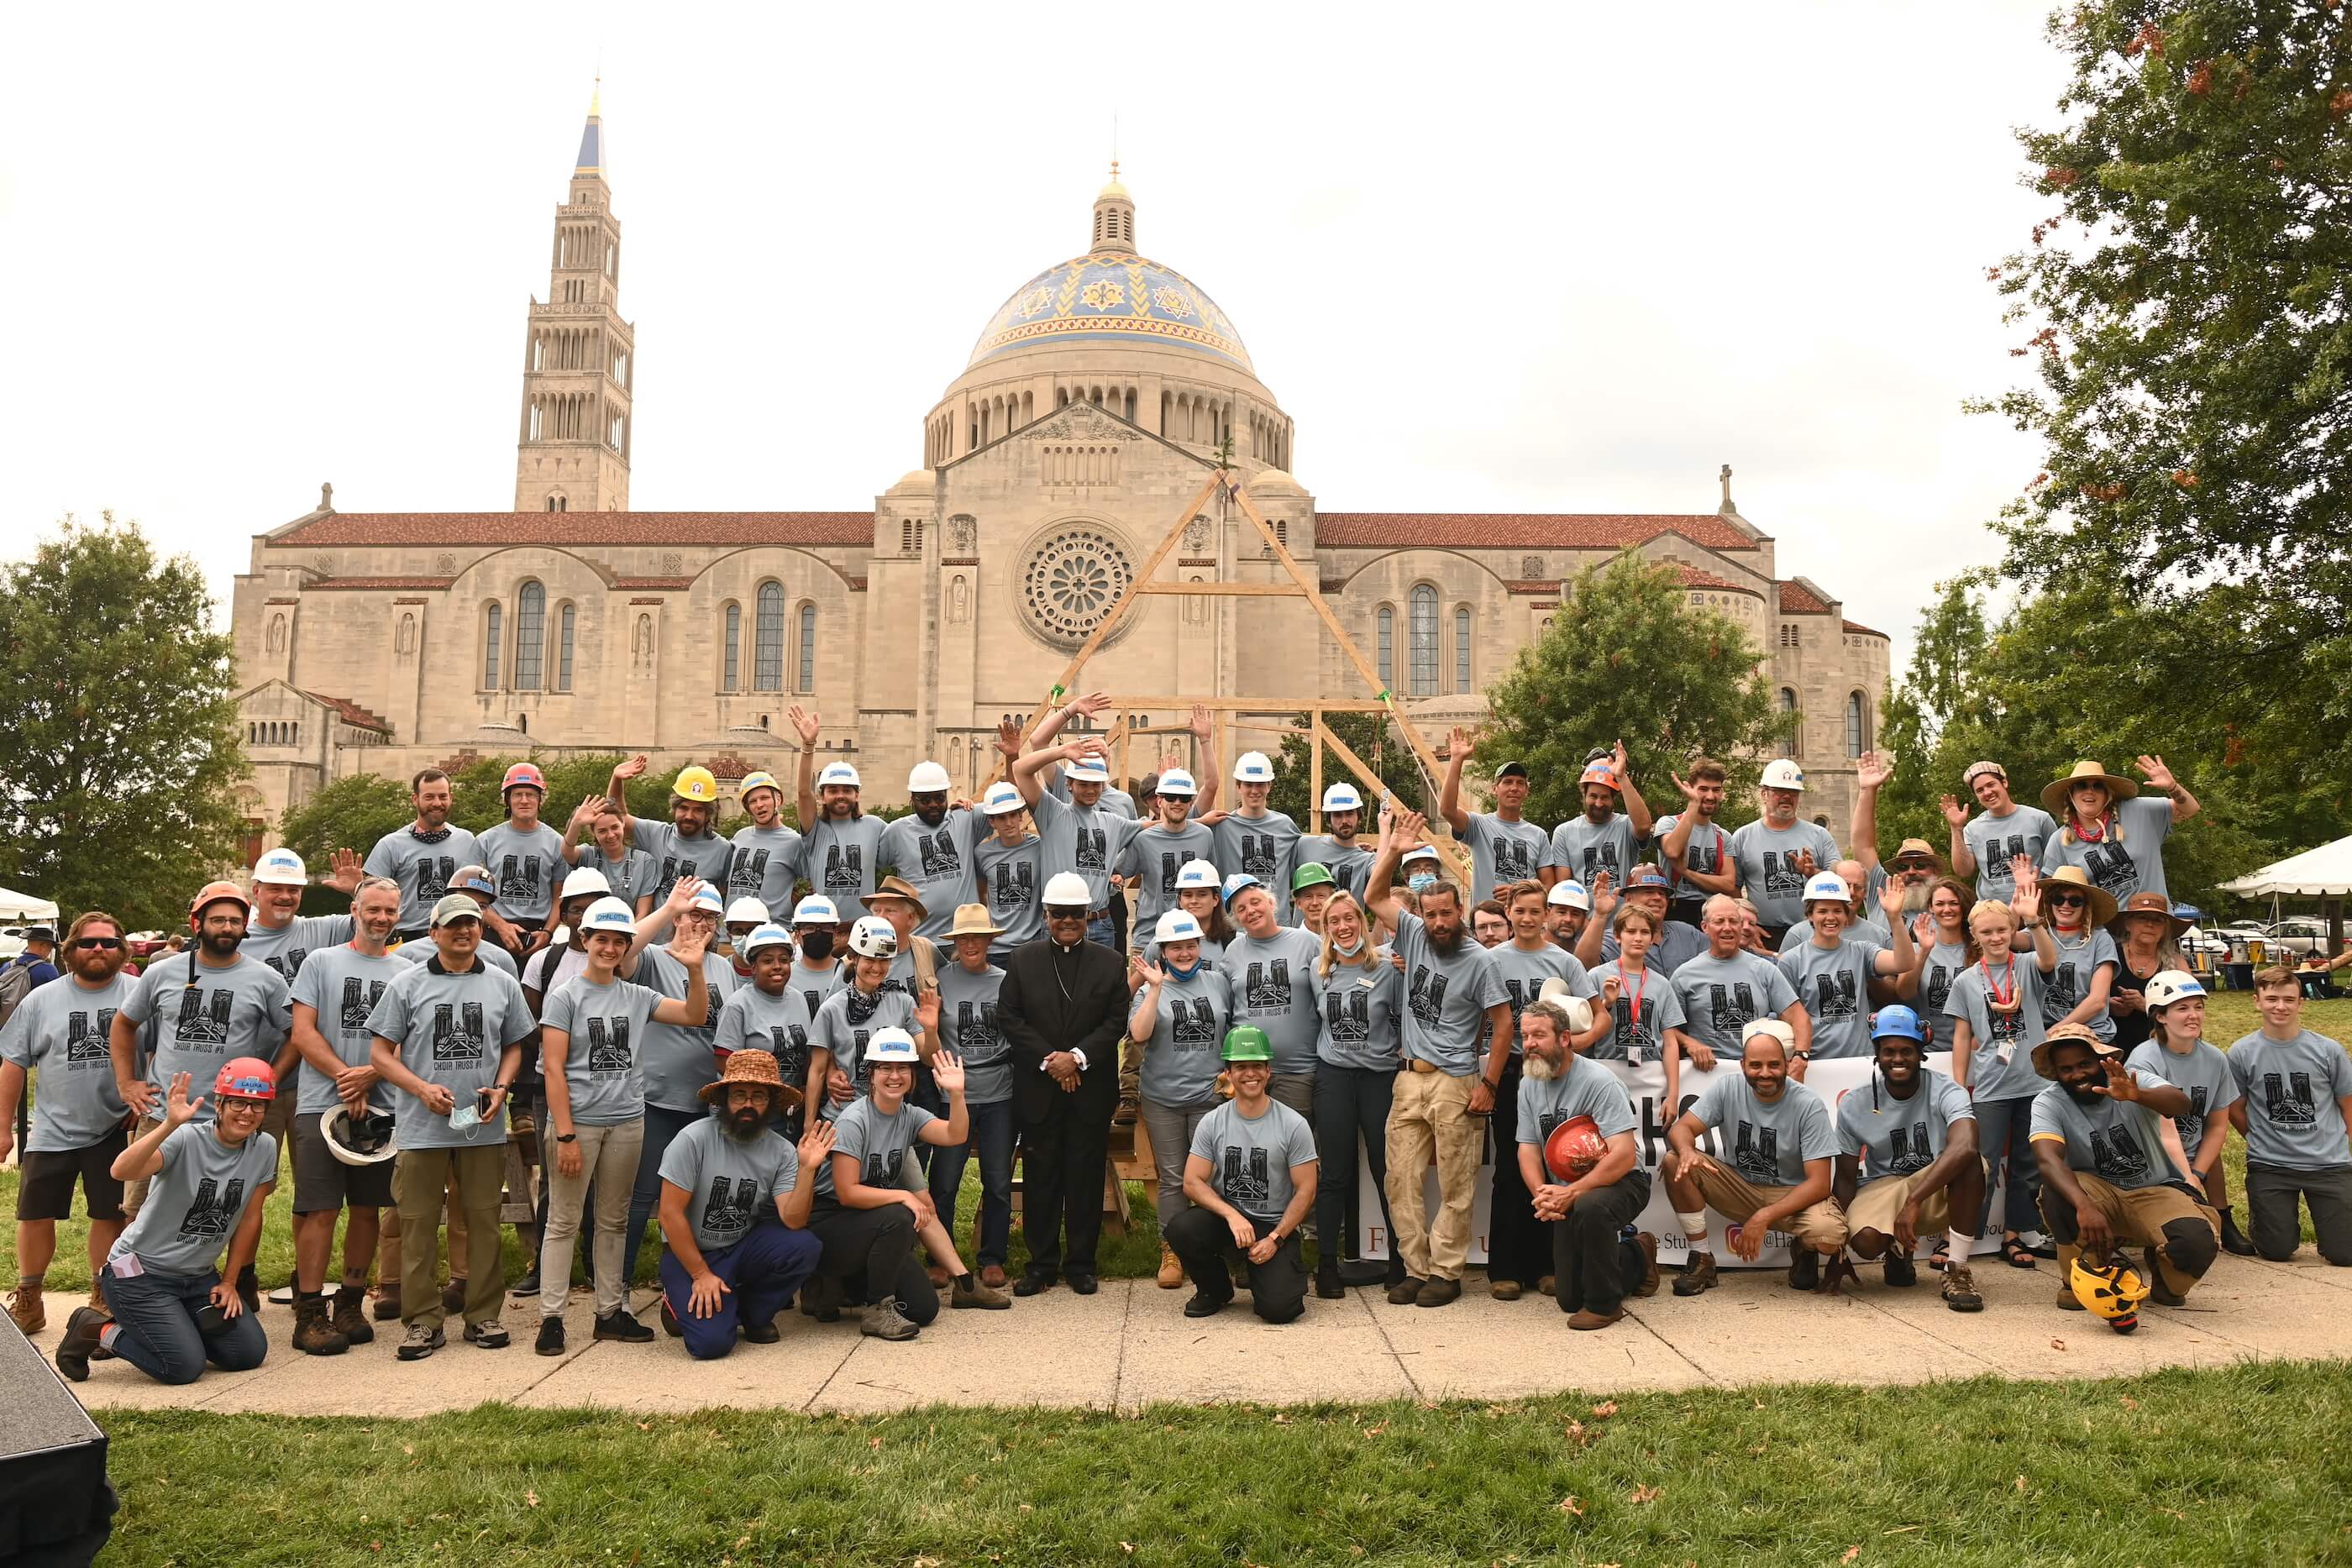 a team poses in front a wooden truss installed outdoors in front of a basilica